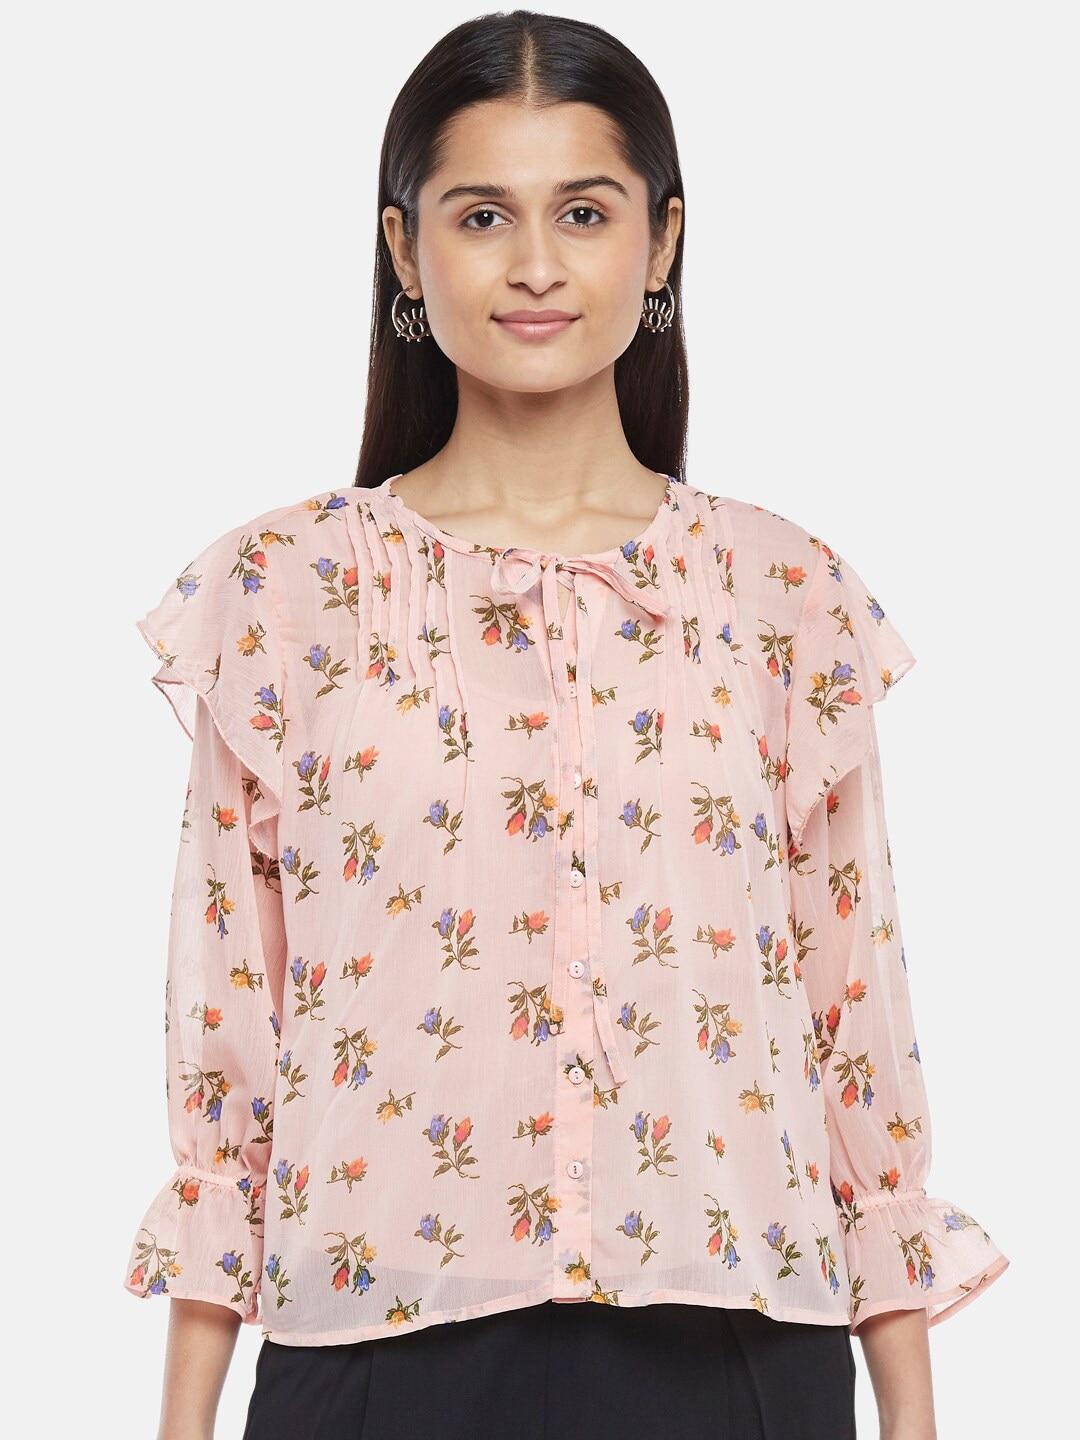 honey-by-pantaloons-pink-floral-print-tie-up-neck-top